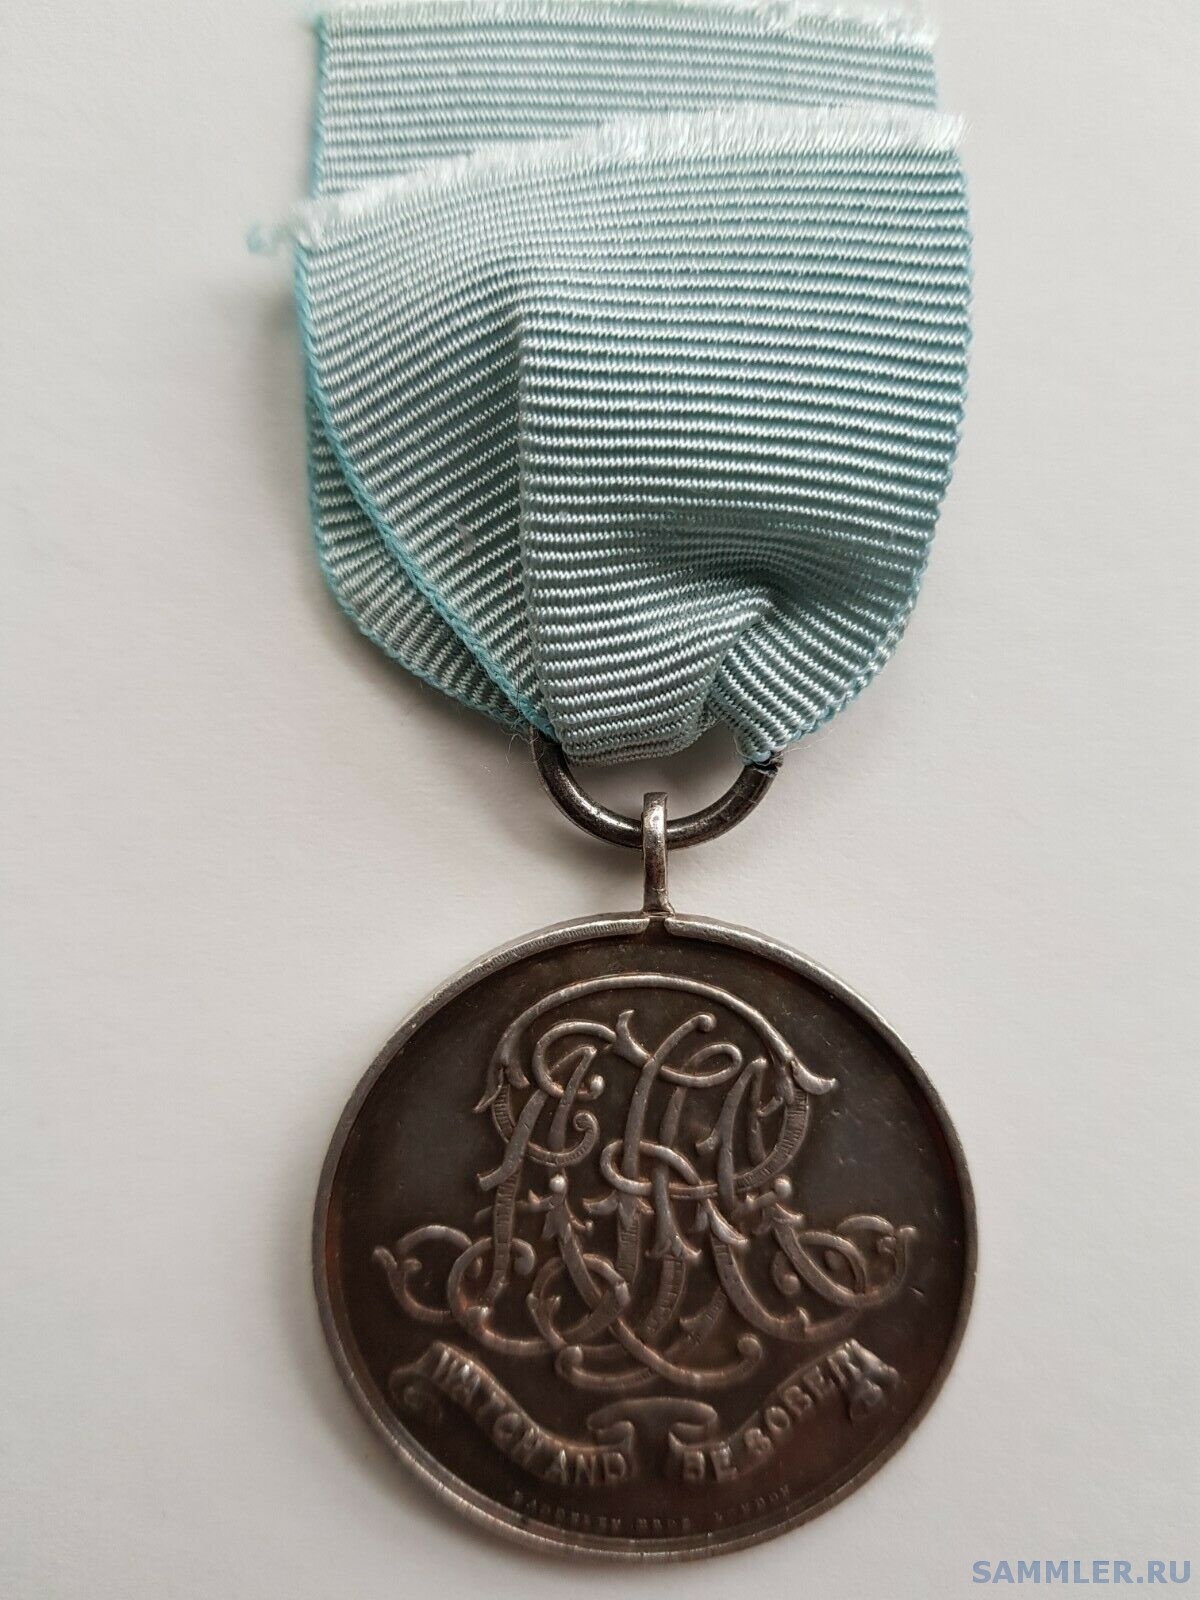 Royal-Army-Temperance-Association-Medal-Watch-And-Be-_57.jpg